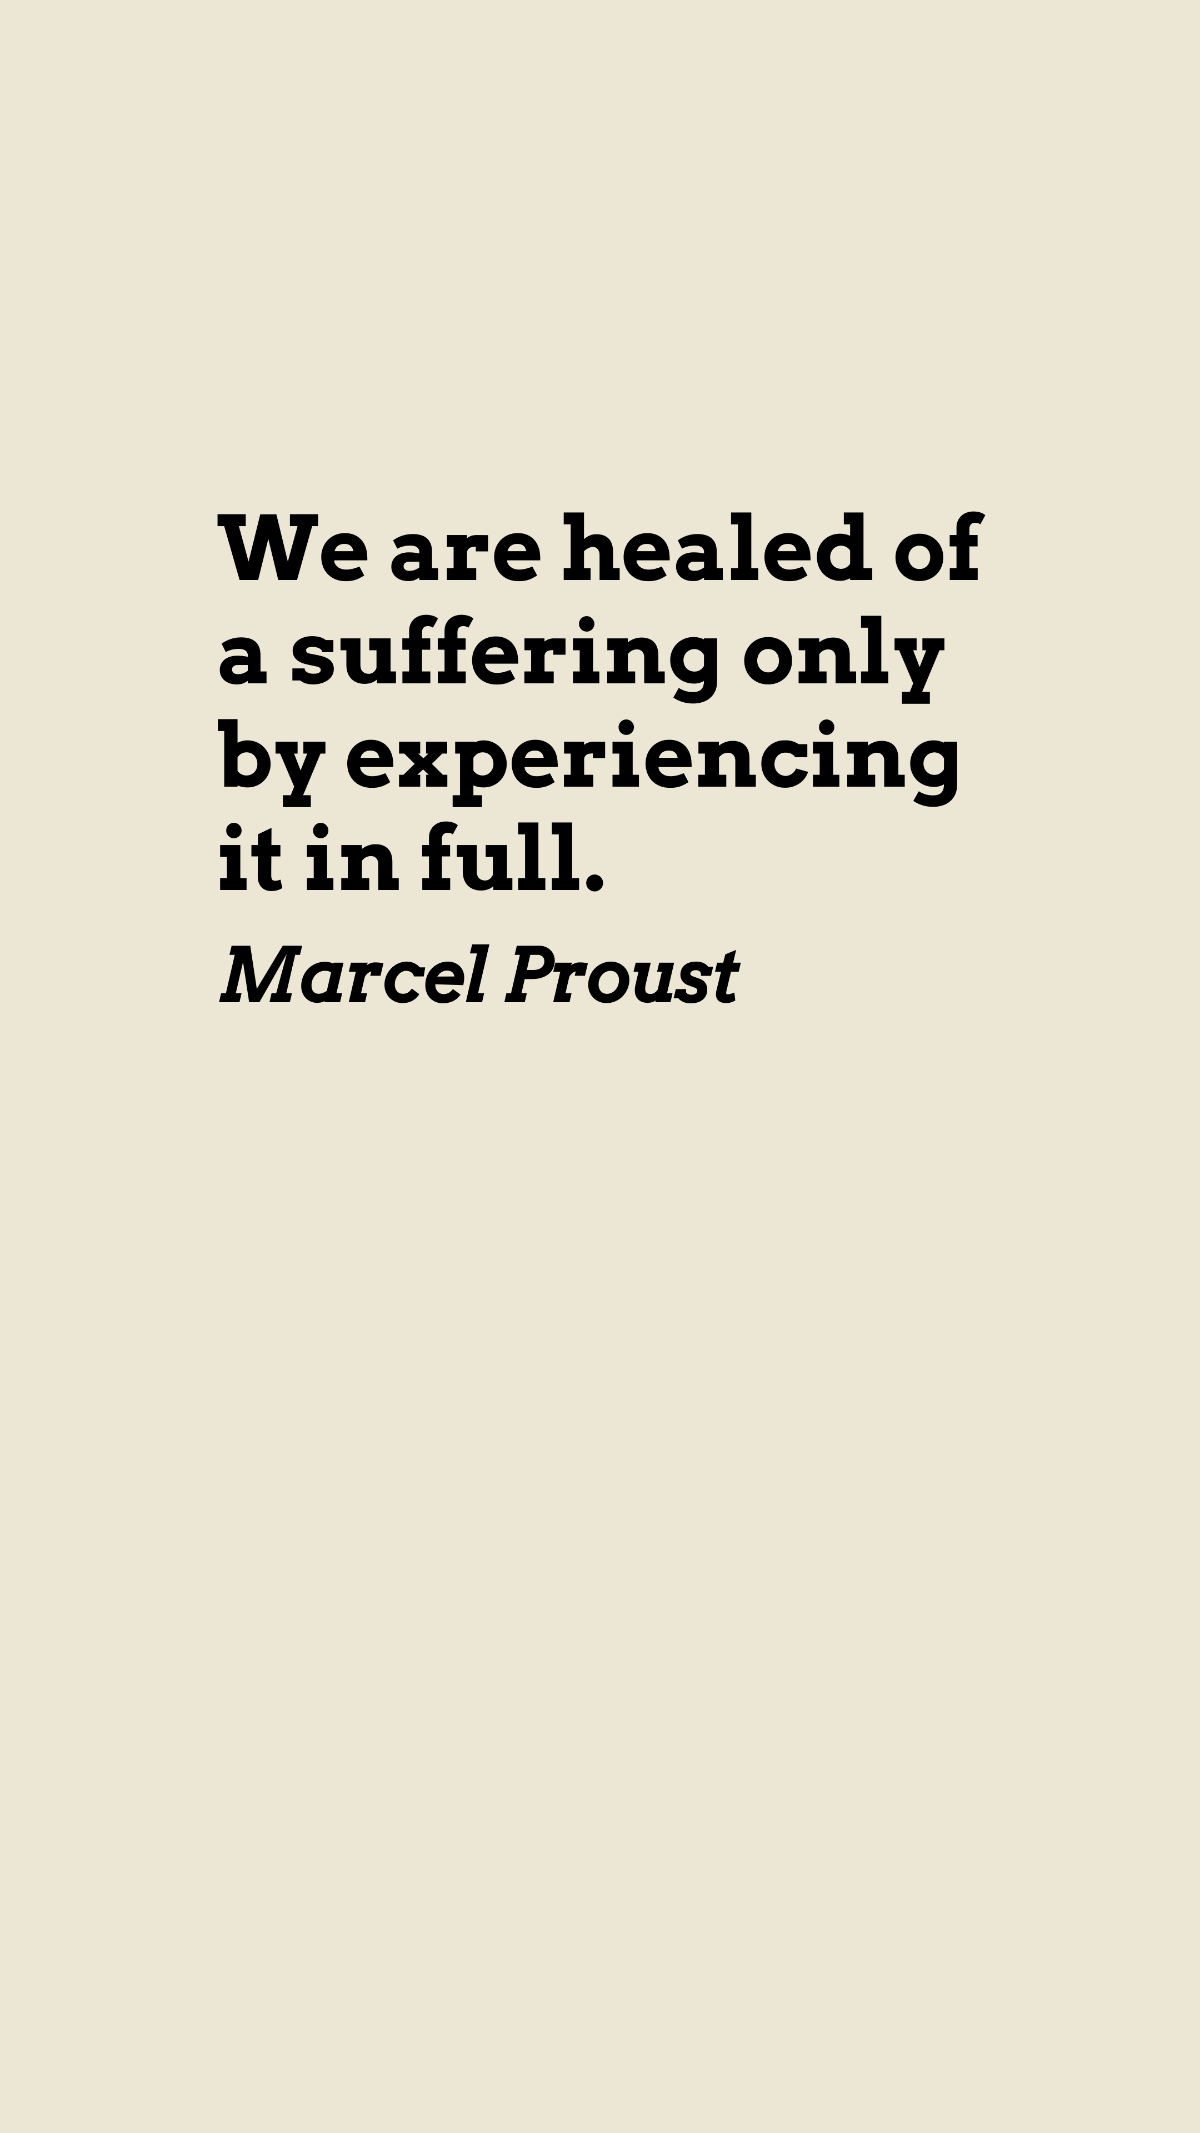 Free Marcel Proust - We are healed of a suffering only by experiencing it in full. Template